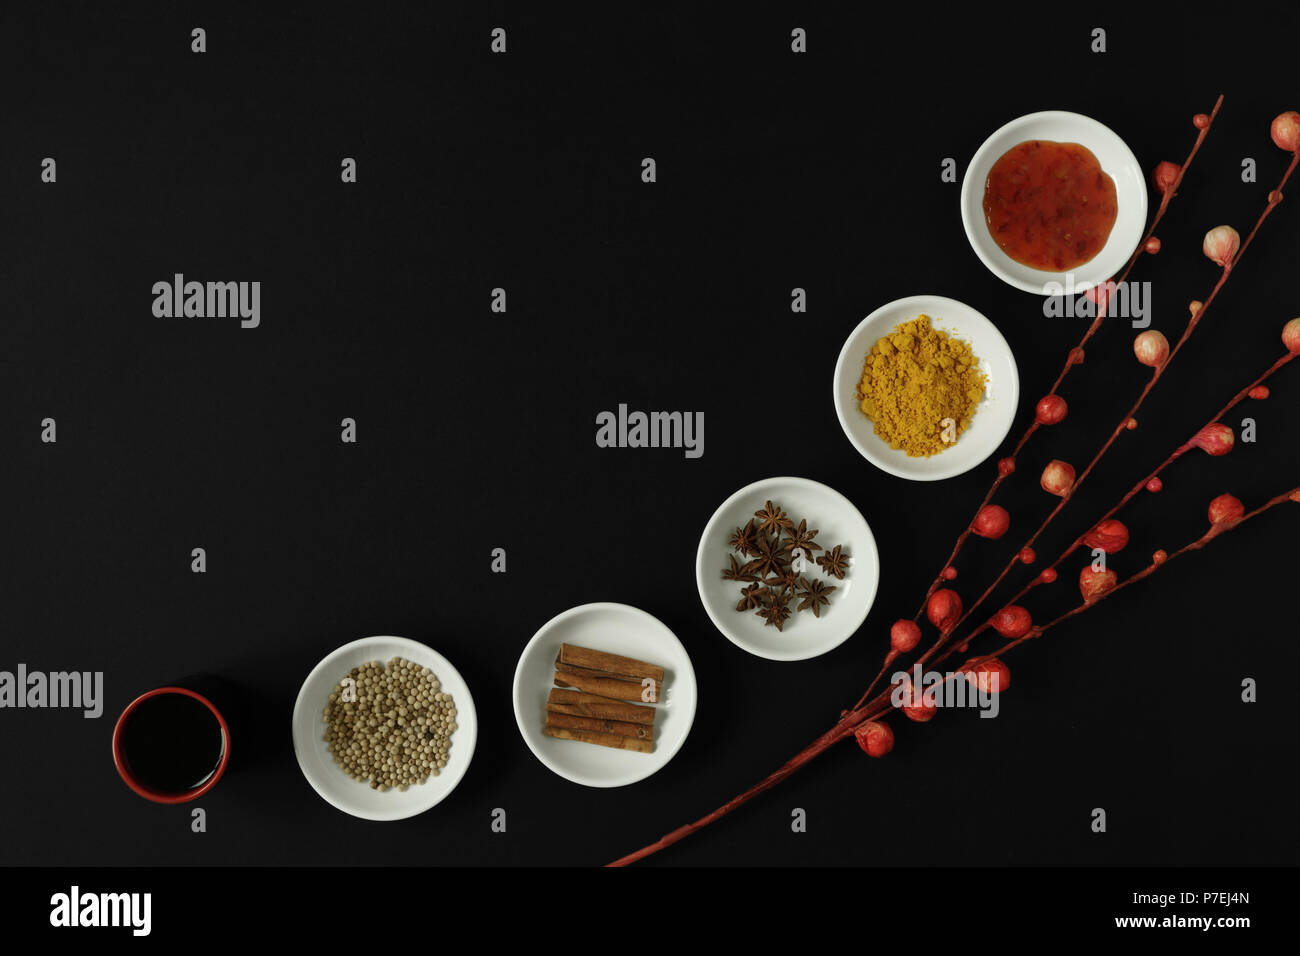 Asian spices, herbs and cooking ingredients on black background. Stock Photo